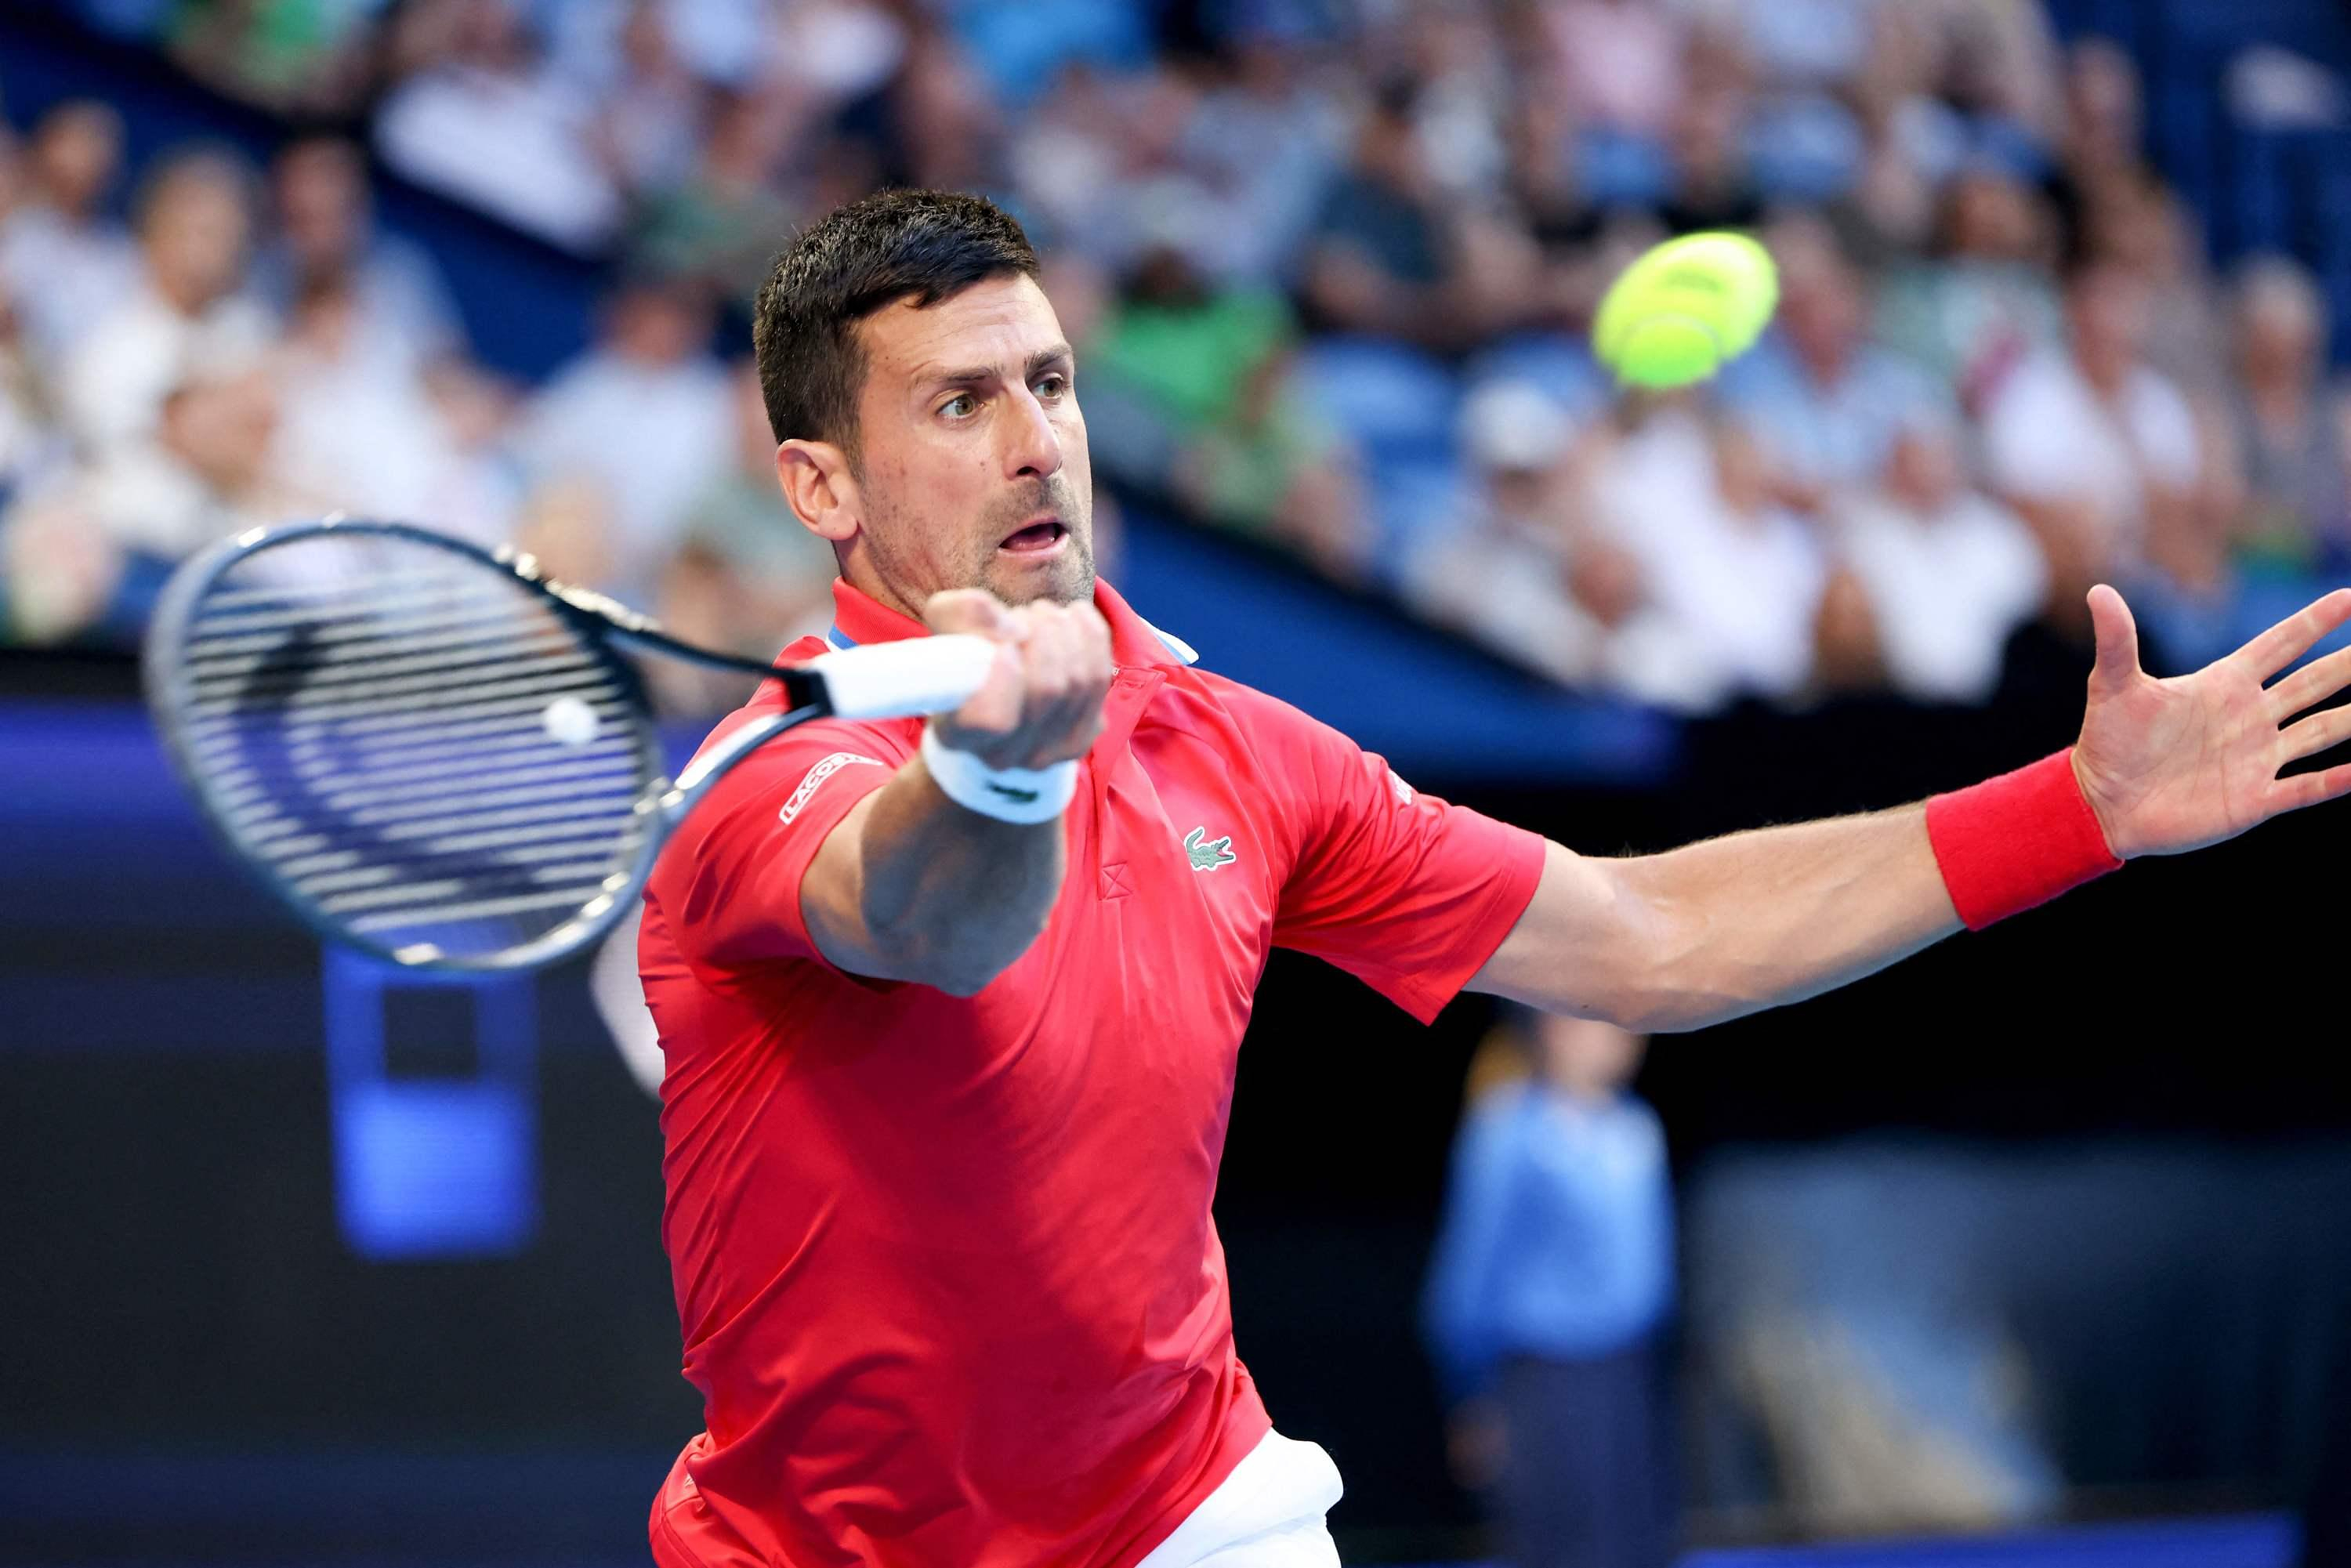 Tennis: “I have enough time to recover properly for the Australian Open,” explains Djokovic